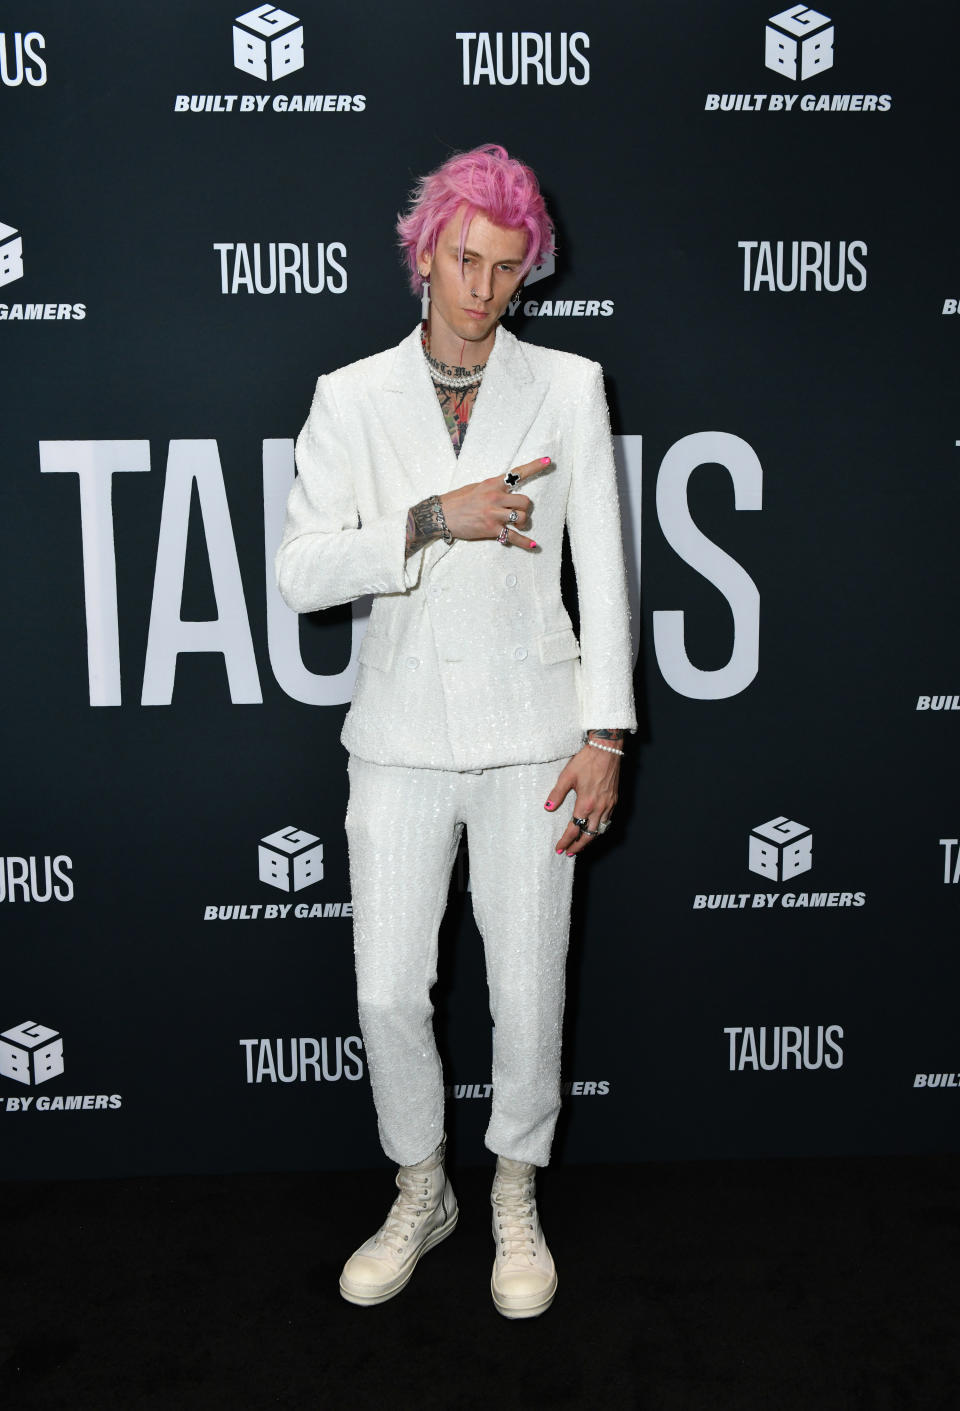 MGK pulling a "rock n roll" finger sign in a suit at the premiere of "Taurus"